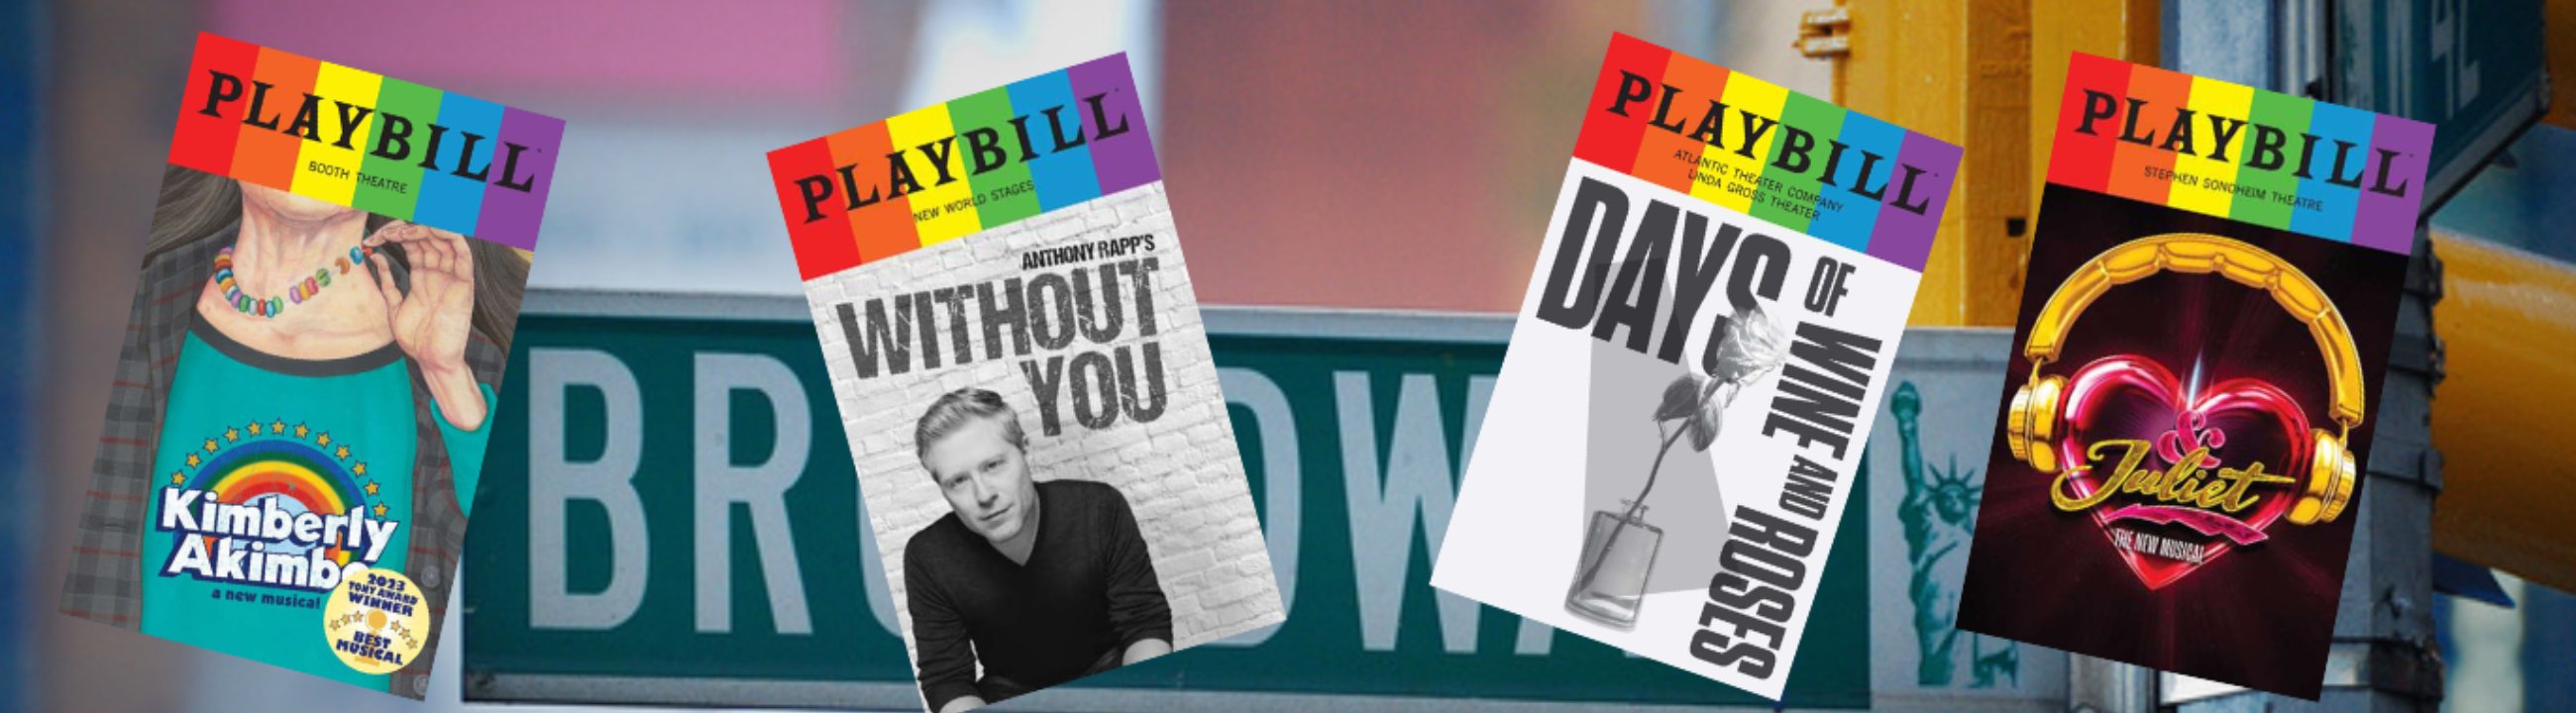 PRIDE LIMITED EDITION PLAYBILLS